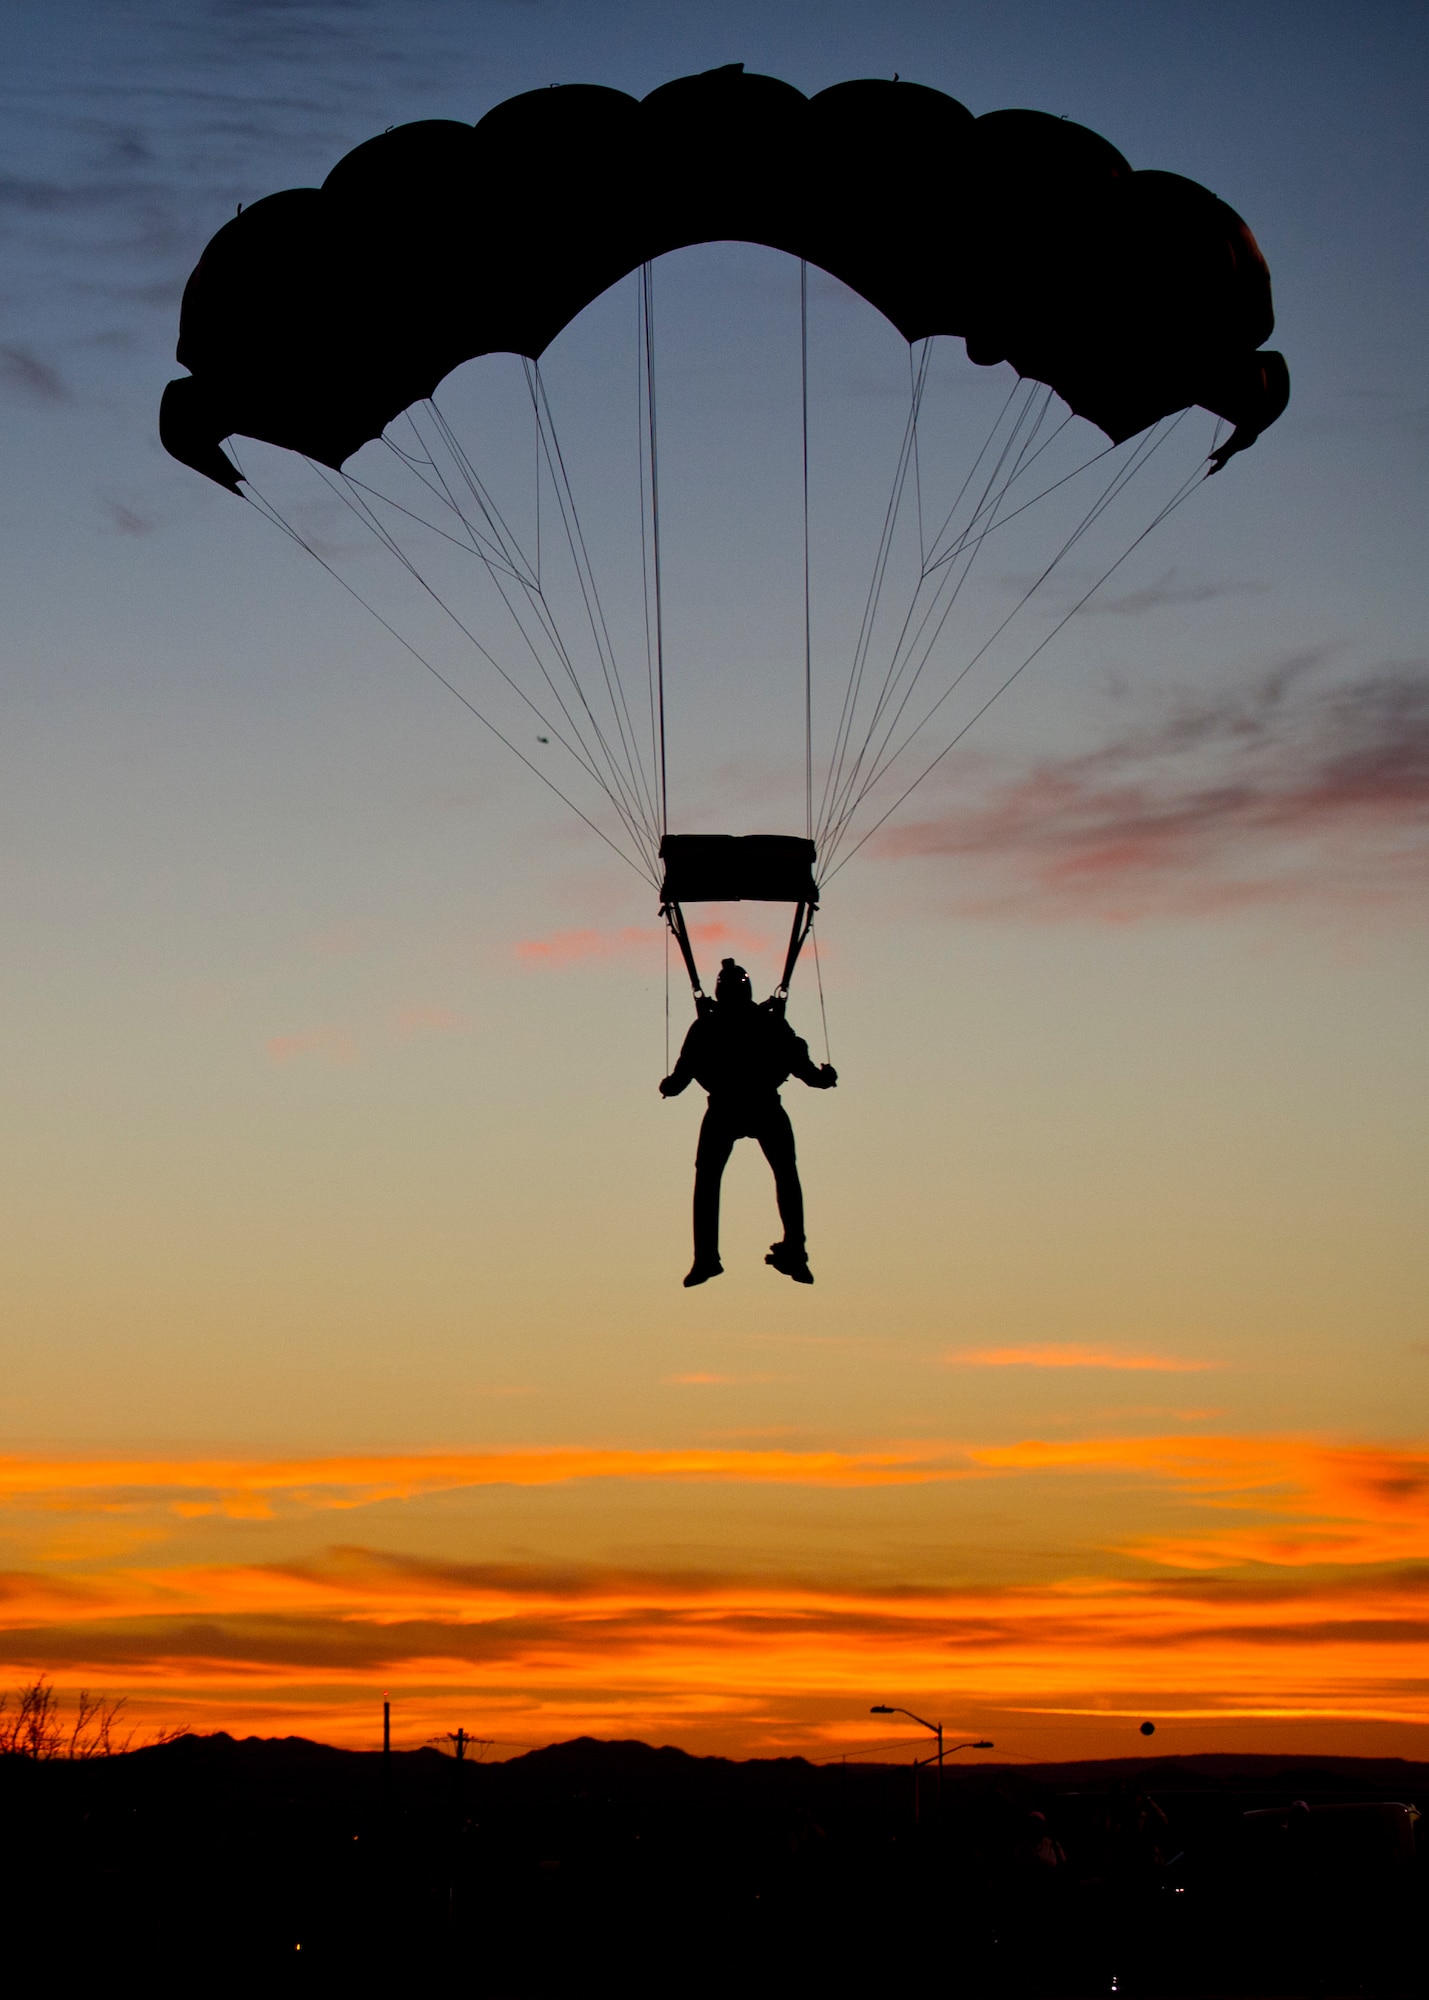 WHITE SANDS MISSILE RANGE, N.M. – A member of the Black Daggers, a U.S. Army Special Operations Command parachute demonstration team, prepares to land during the opening ceremony of the Bataan Memorial Death March here March 25. The demonstration team is comprised of volunteers from throughout ARSOC, all with diverse backgrounds. They are skilled in various military specialties, including Special Forces, Rangers, civil affairs, psychological operations, and signal and support. This was the first year the Black Daggers participated in the opening ceremony of the Bataan Memorial Death March. (U.S. Air Force photo by Airman 1st Class Daniel E. Liddicoet/Released)